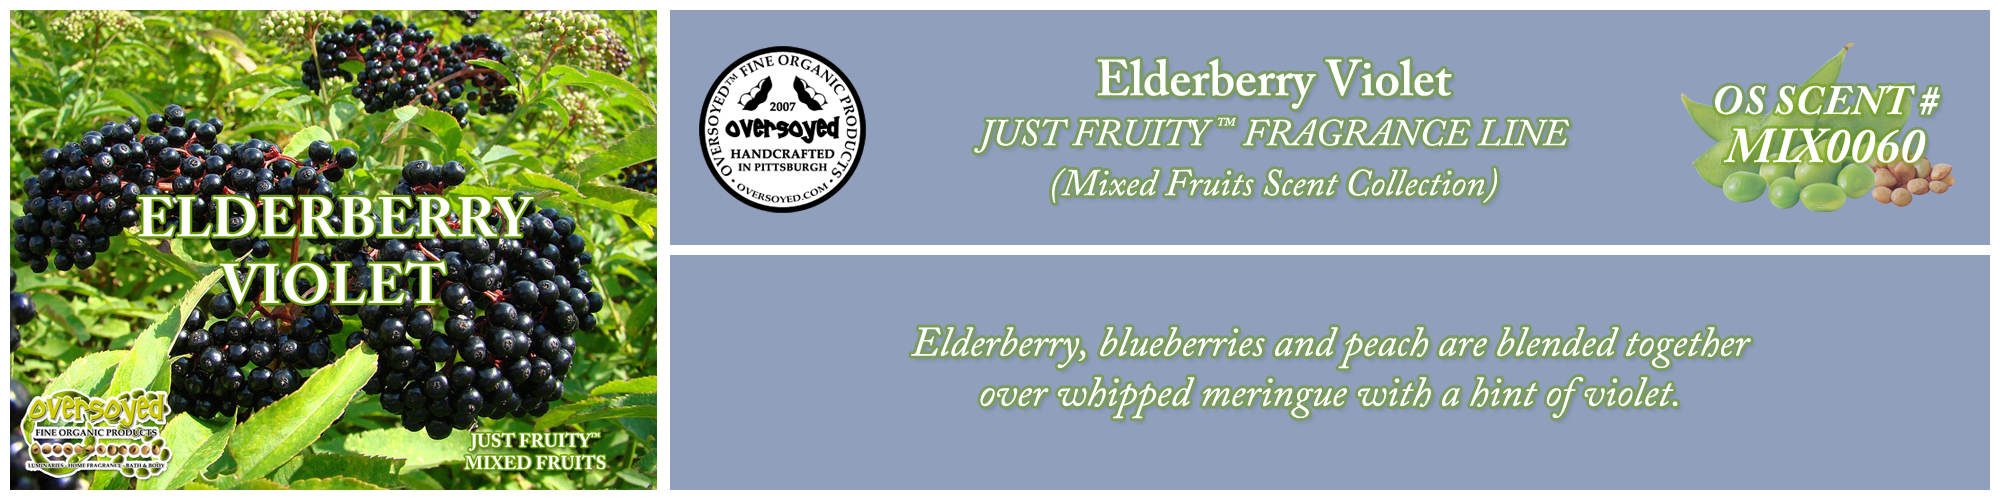 Elderberry Violet Handcrafted Products Collection